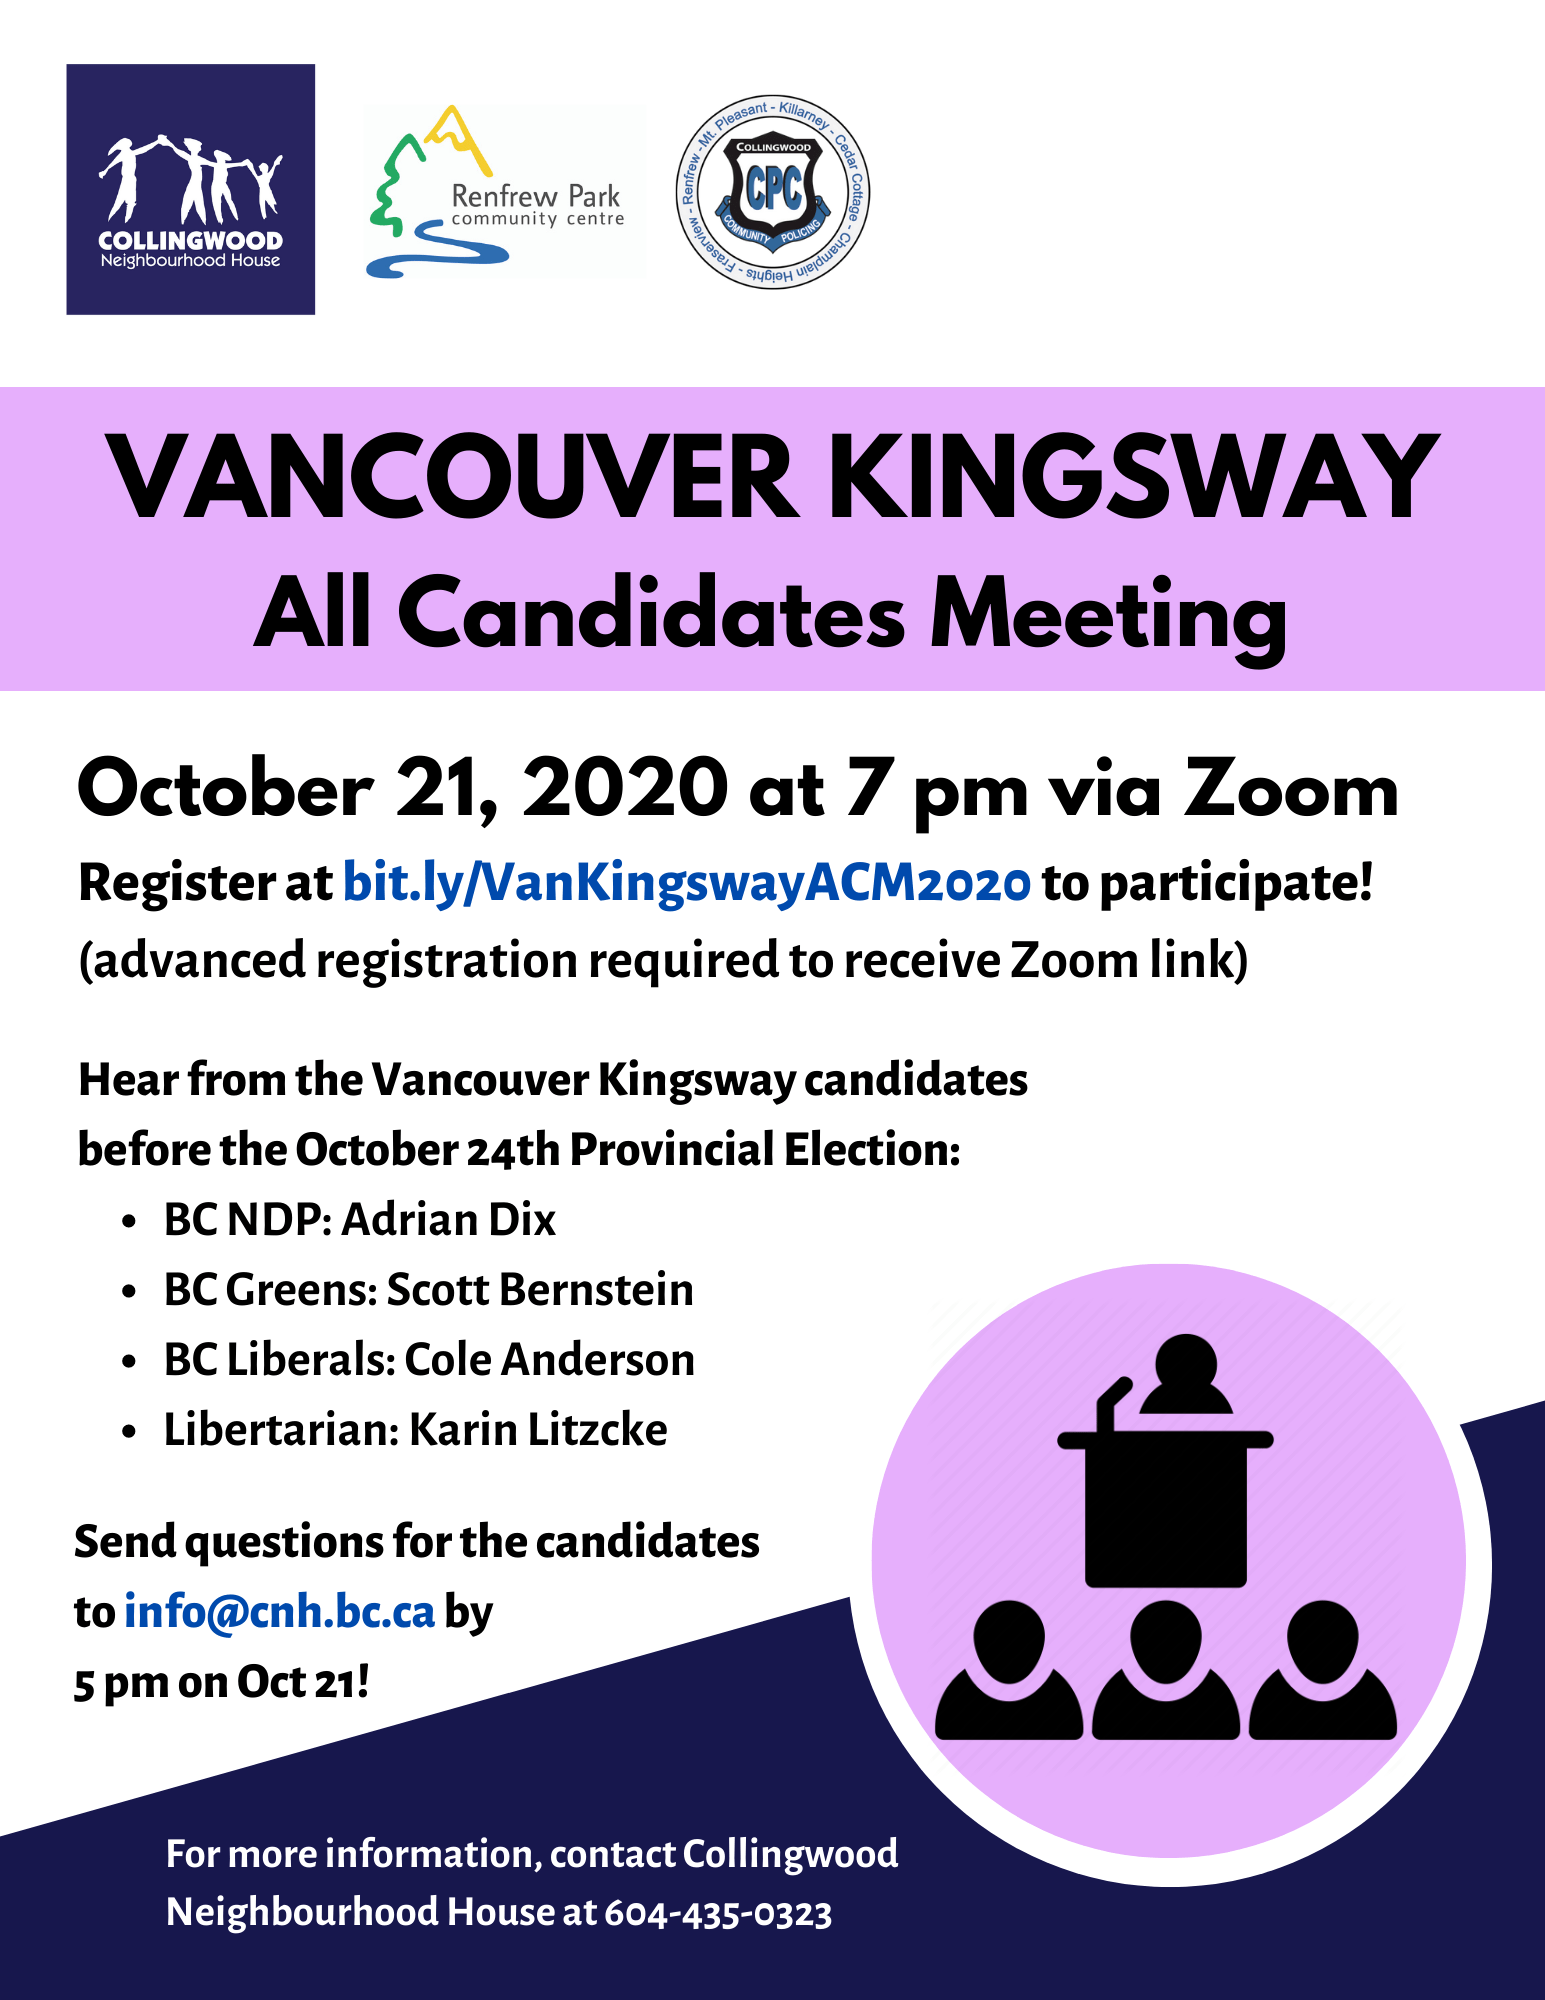 A graphic poster for the Vancouver Kingsway 2020 All Candidates Meeting. There is a graphic image of a person at a podium speaking to three people.